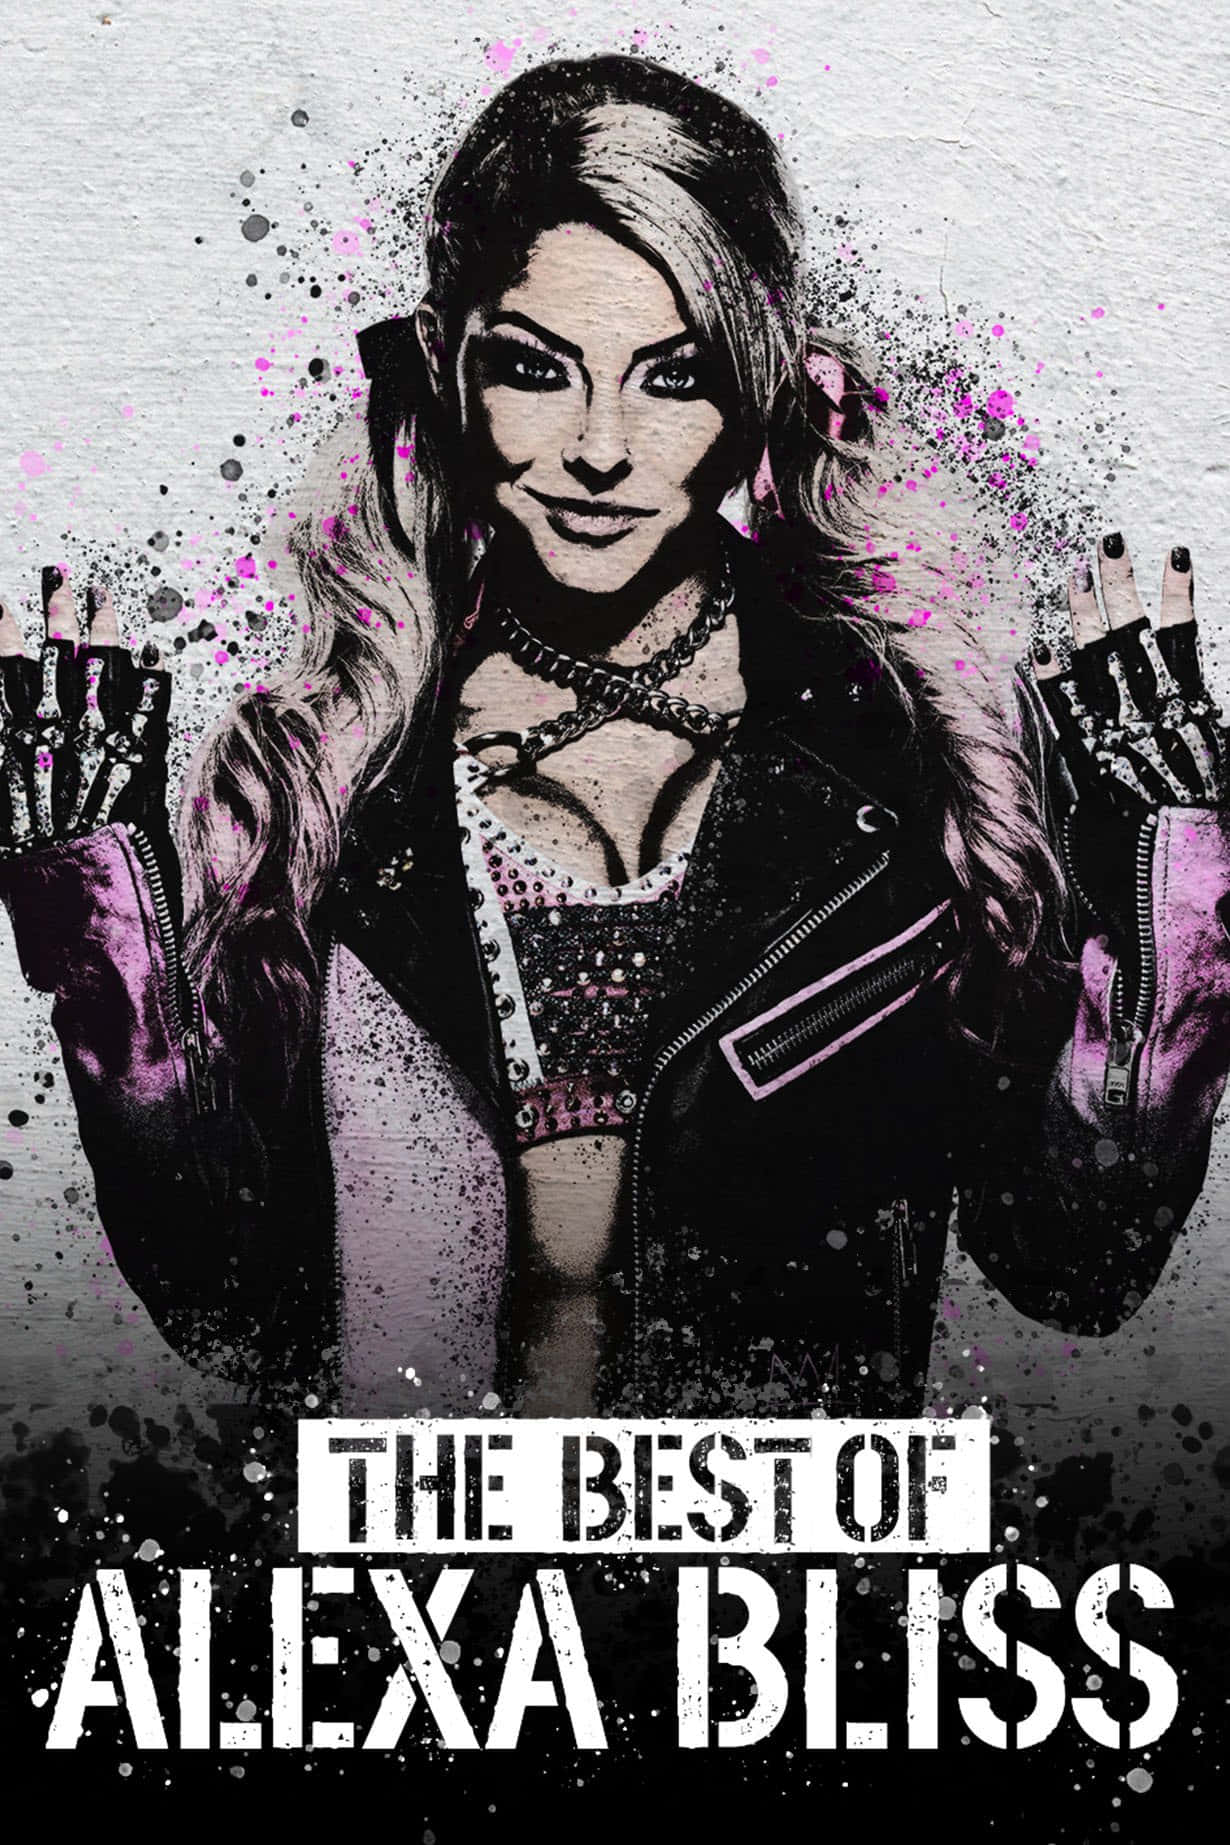 The Best Of Alexa Bliss Background